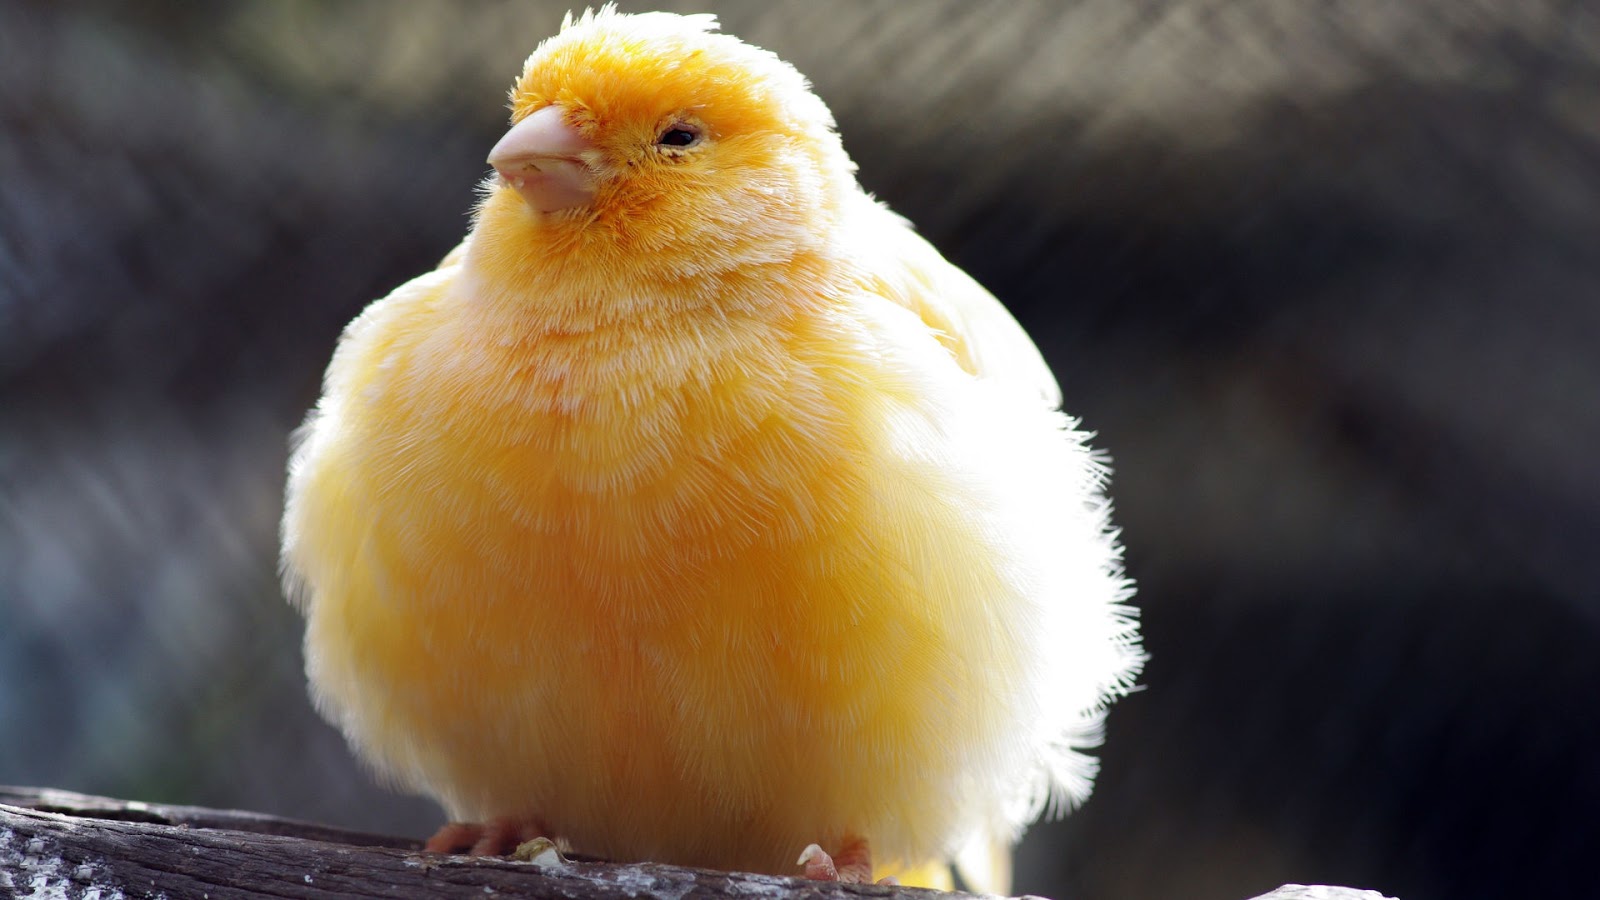 Well behaved women rarely make history: The chubby canary in a feminist mine